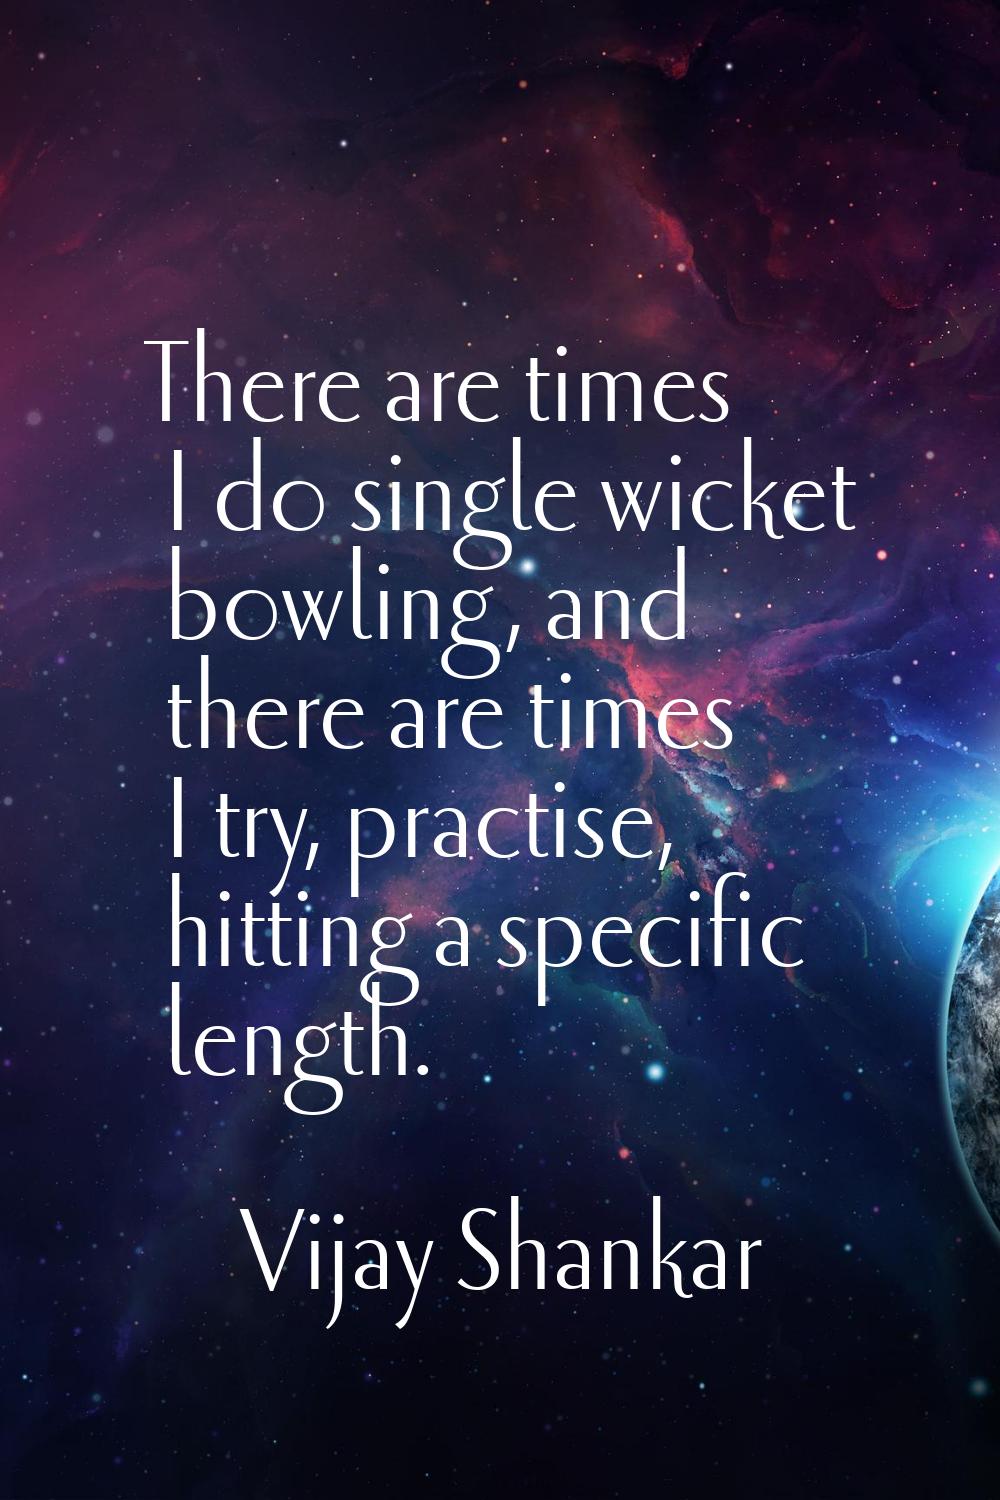 There are times I do single wicket bowling, and there are times I try, practise, hitting a specific